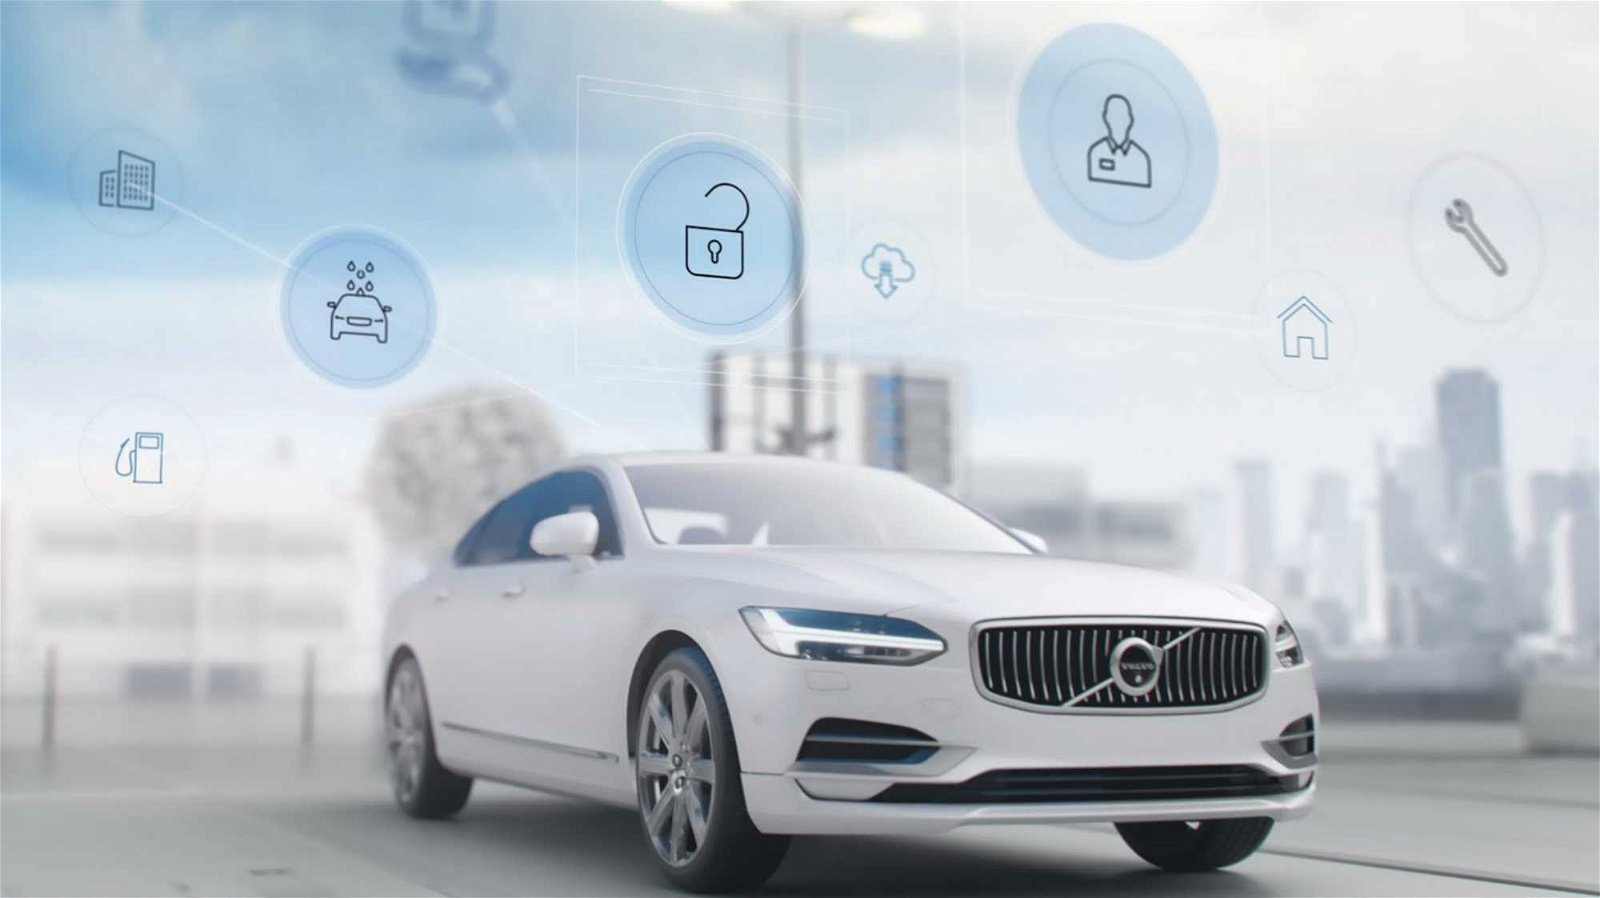 Care by Volvo car sharing 7